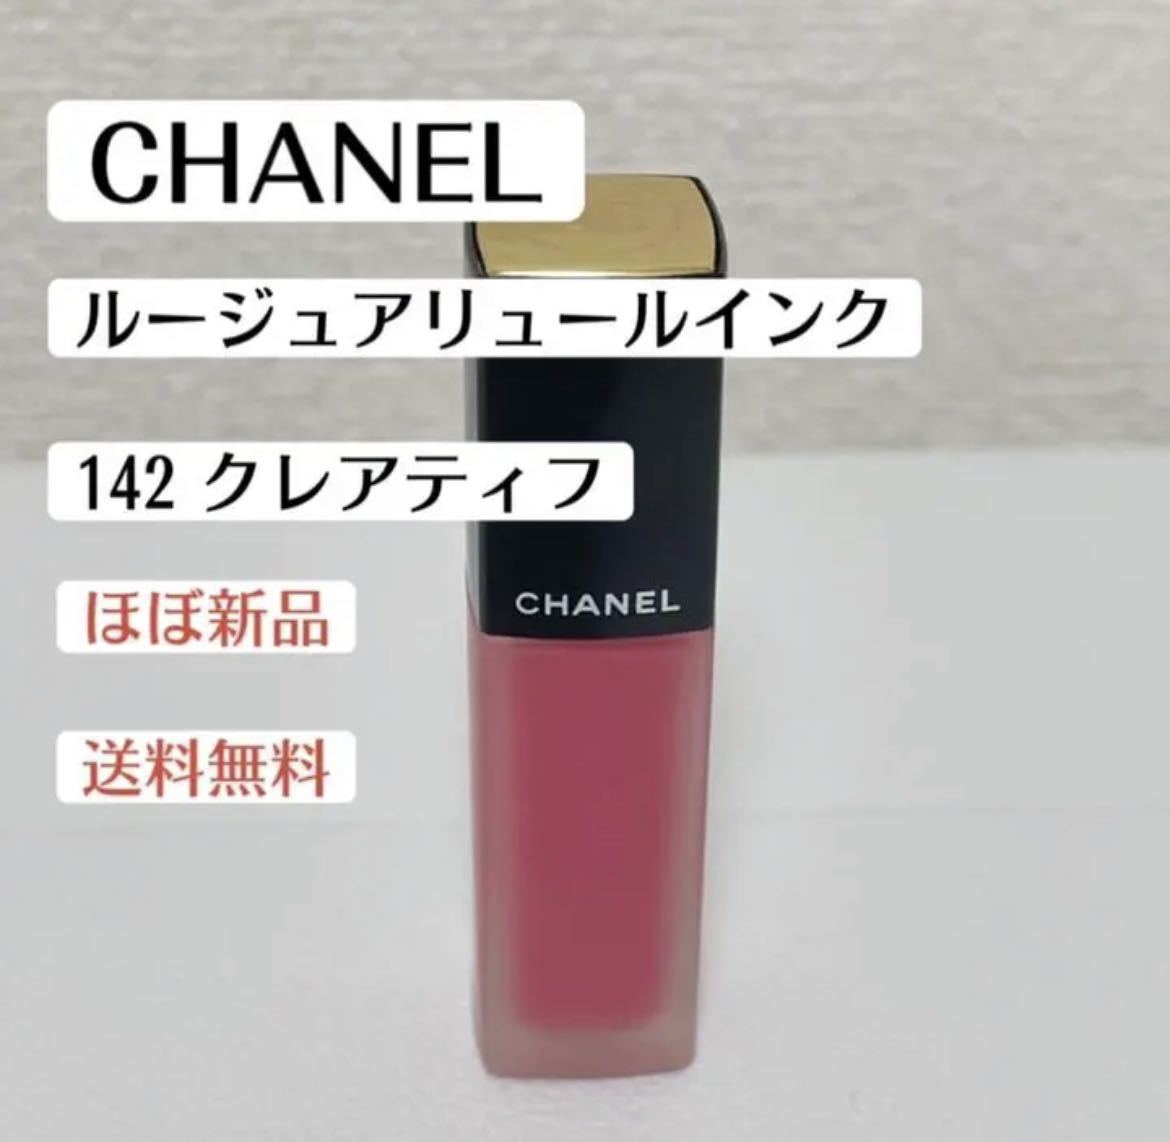  almost new goods Chanel CHANEL rouge Allure ink 142 Crea tif lipstick tin trip tepakos high brand 